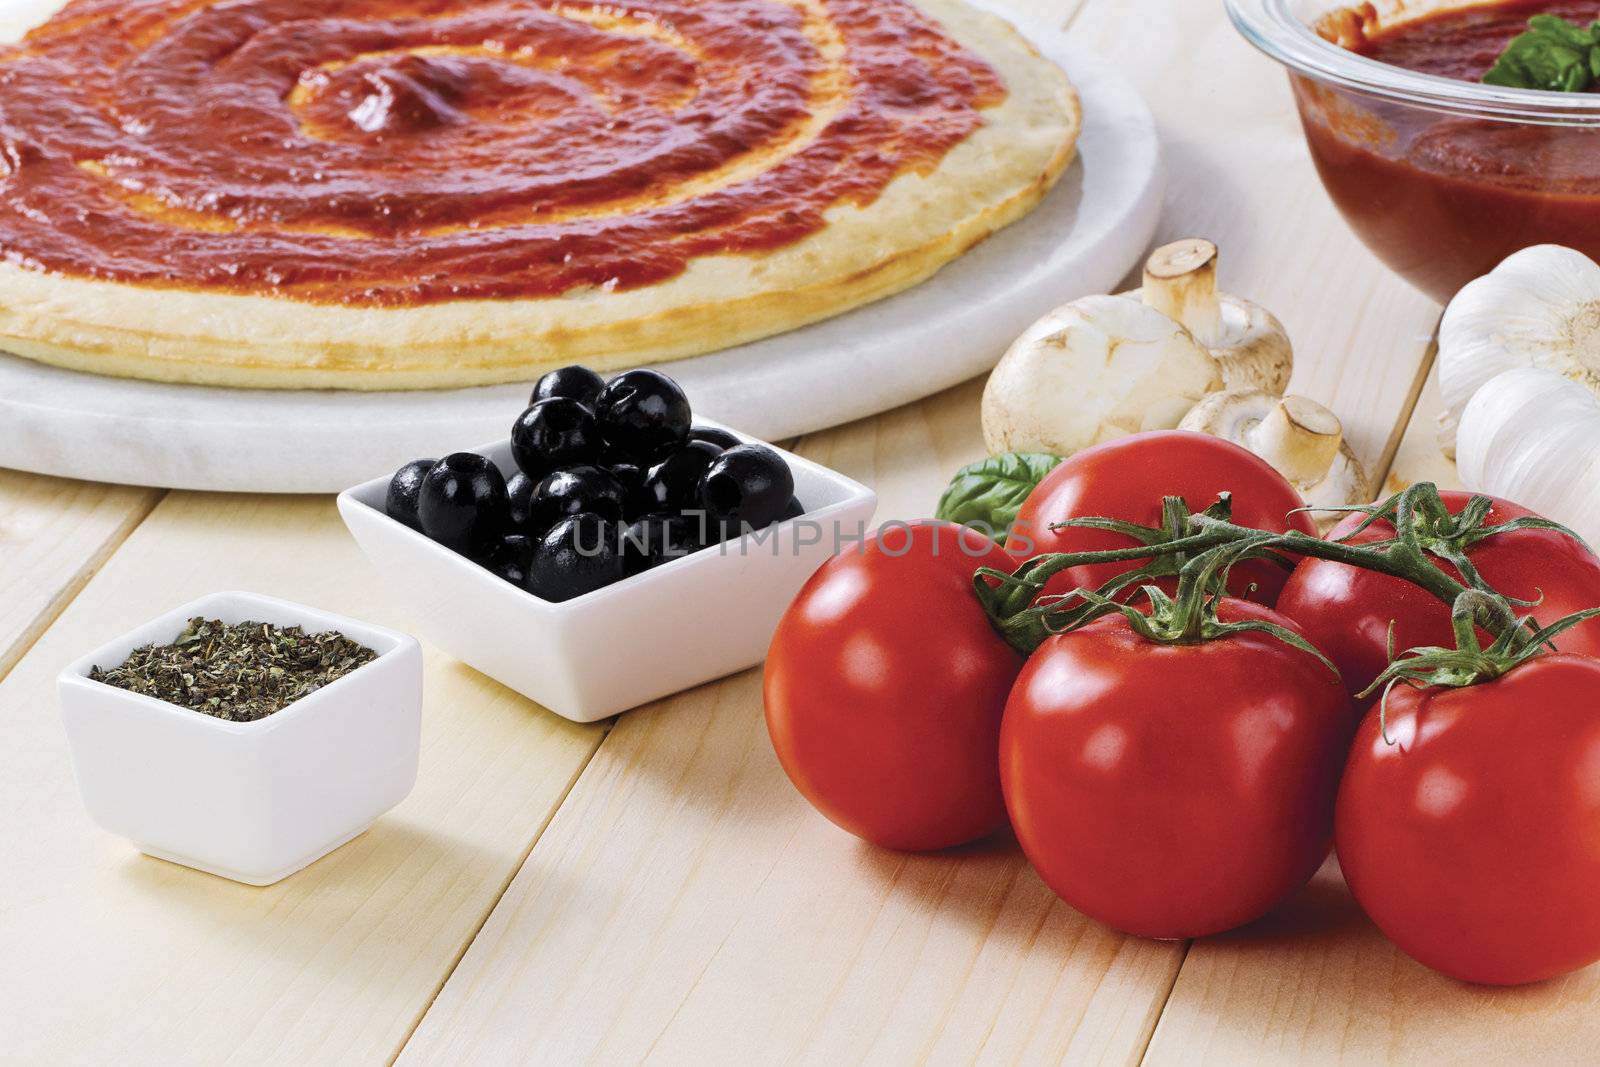 Tomato paste spread on raw pizza dough with tomato, mushrooms, black olives and crushed leaves on the side